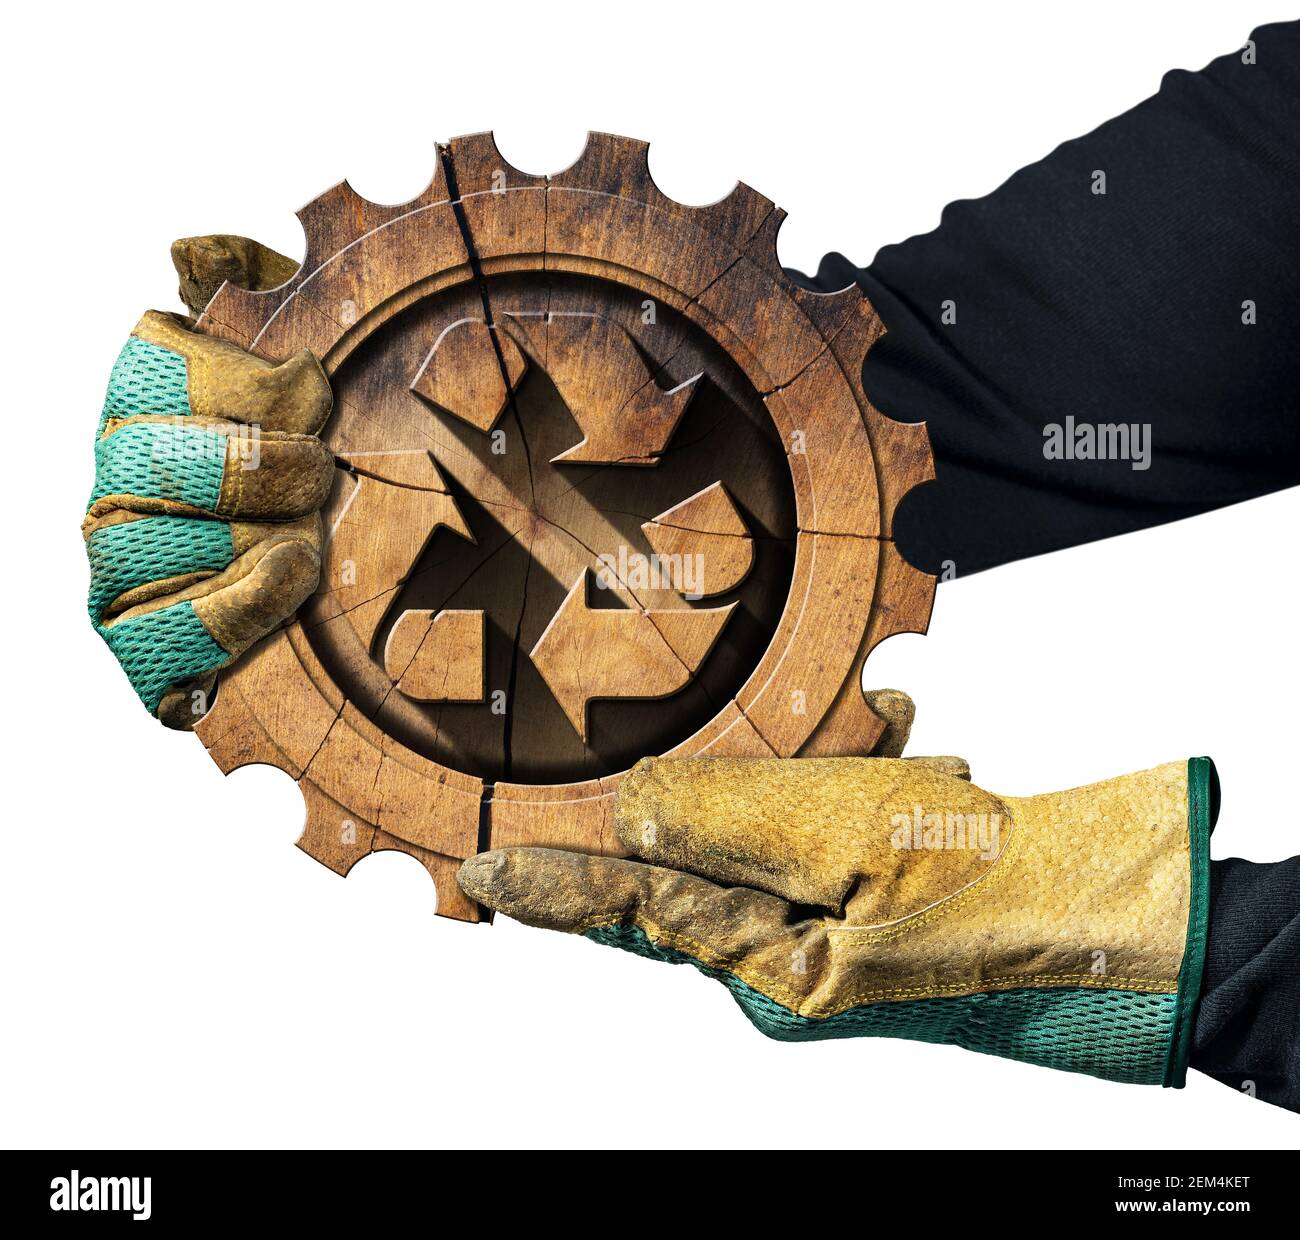 Gloved hands showing a recycling symbol made of wood inside a cogwheel. Sustainable Resources concept. Isolated on white background. Stock Photo